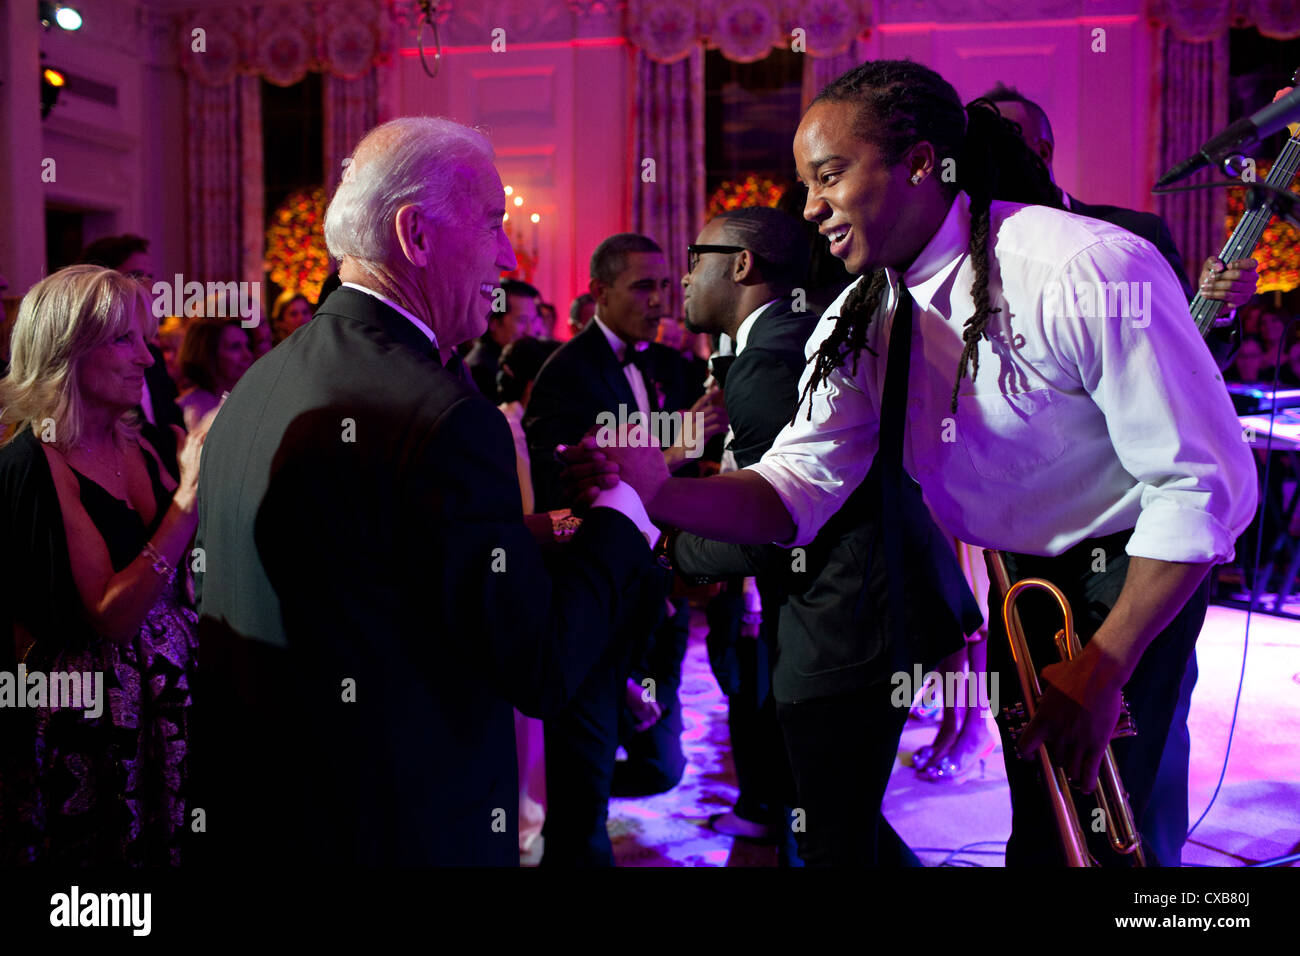 US Vice President Joe Biden greets Lance Powlis, a trumpet player in Janelle Monte's band following their State Dinner performance October 13, 2011 in the State Dining Room of the White House. Stock Photo